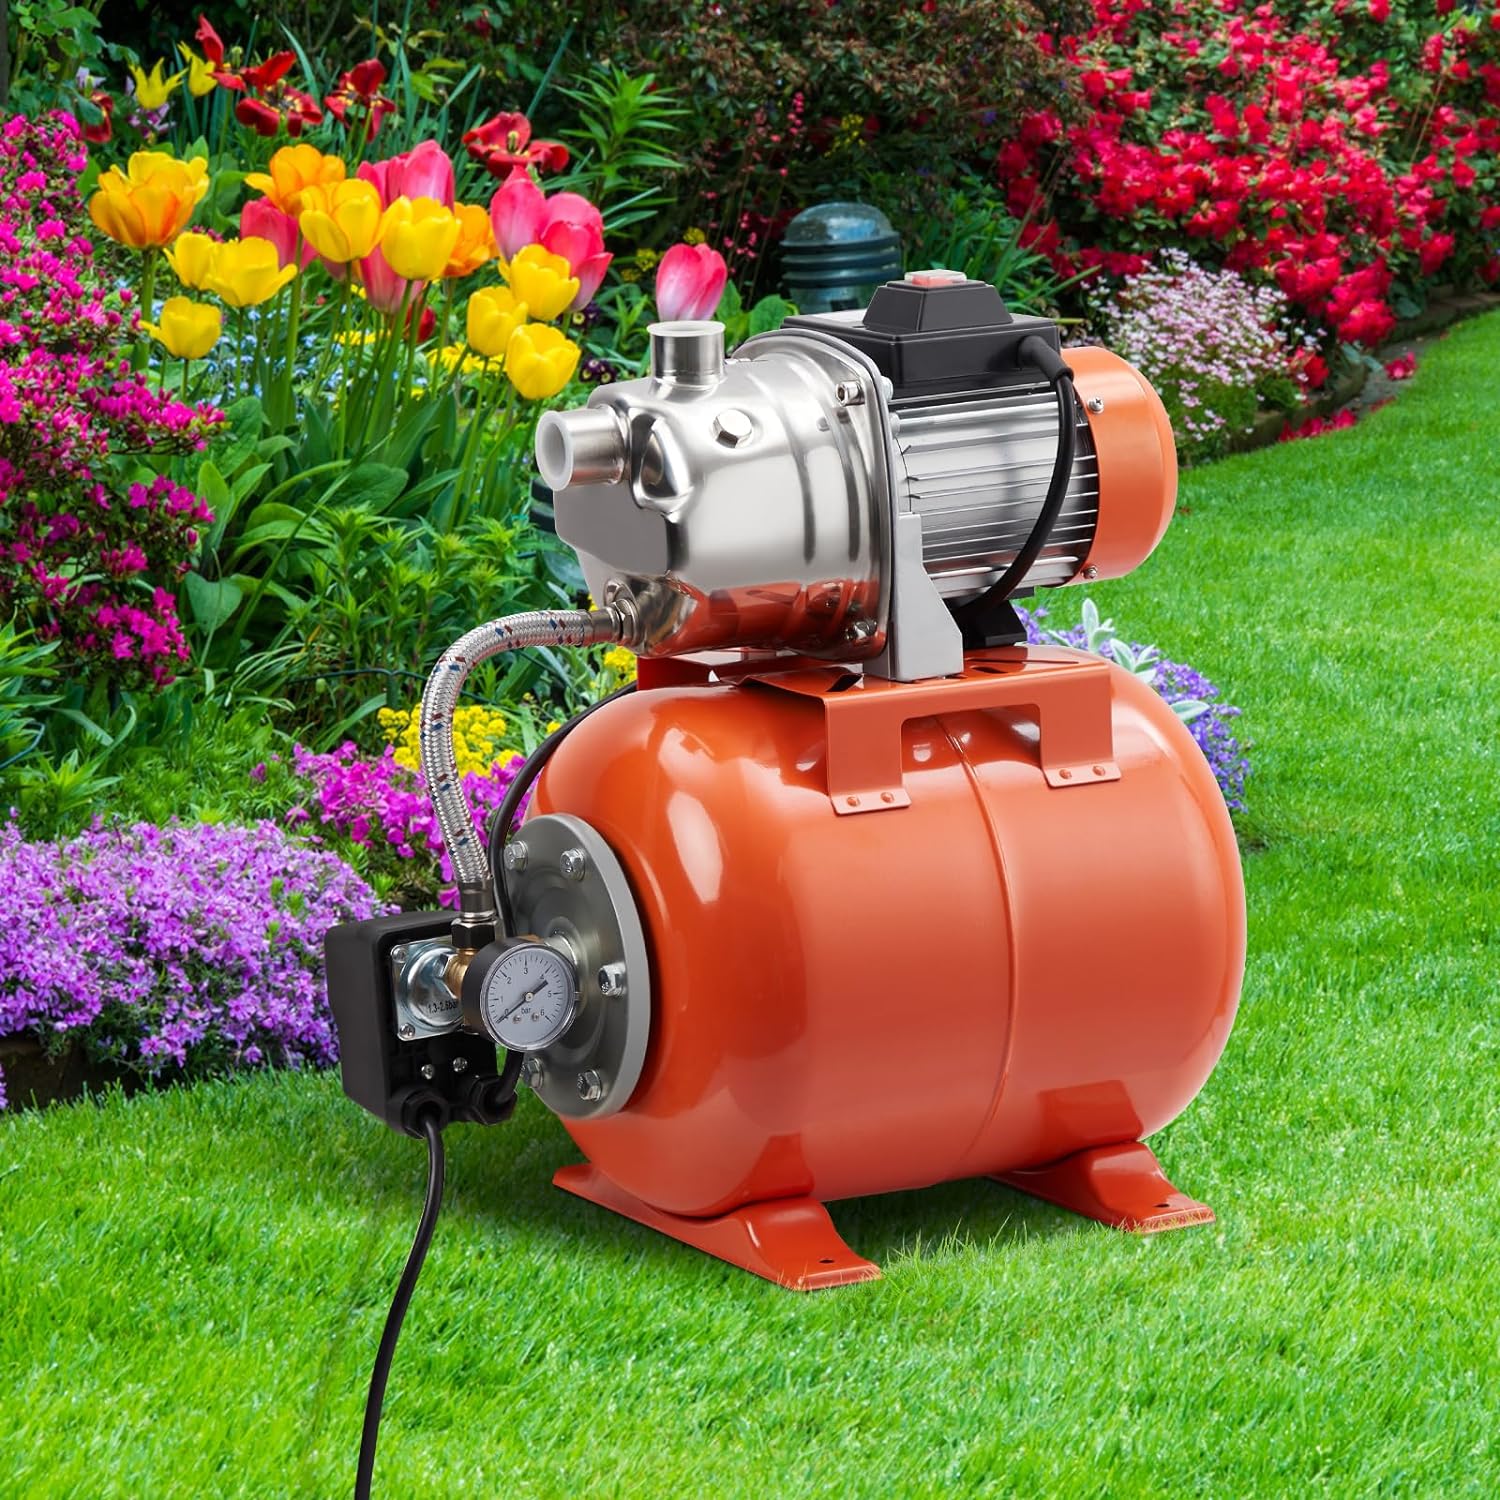 1HP Shallow Well Pump with Pressure Tank, Stainless Steel, 115V Irrigation Pump, Automatic Water Booster Jet Pump for Home, Garden, Lawn